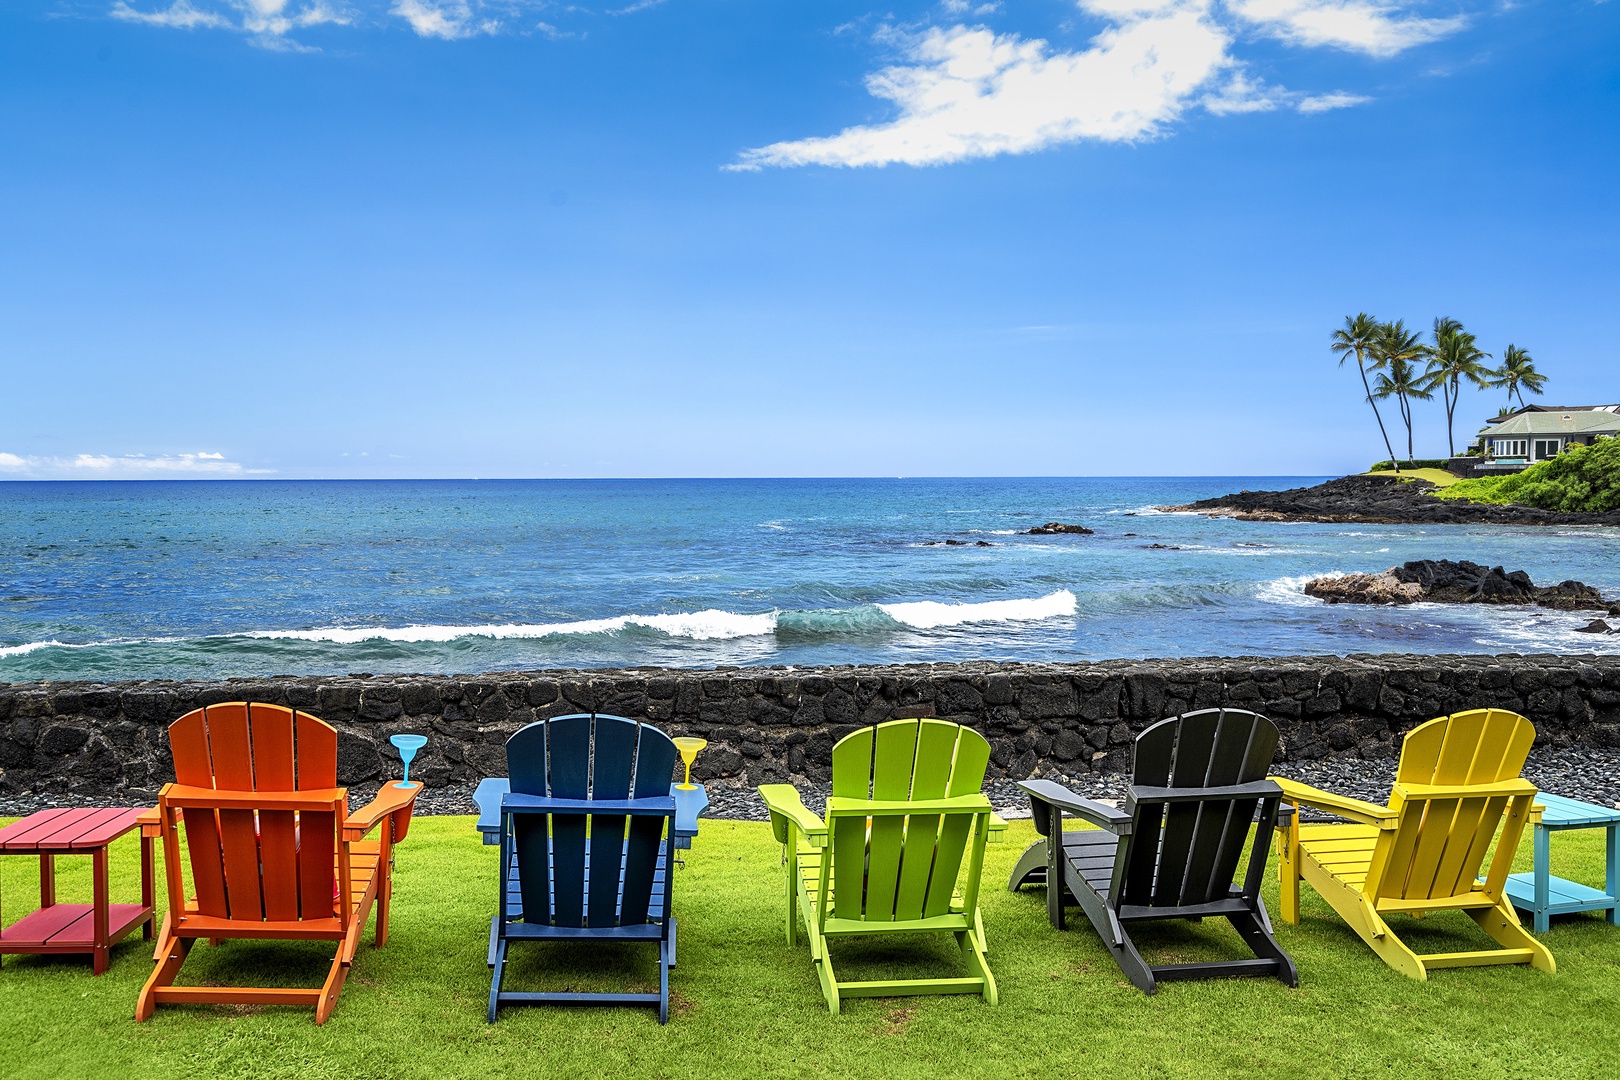 Kailua Kona Vacation Rentals, Hale Pua - Watch the waves roll in as your troubles melt away